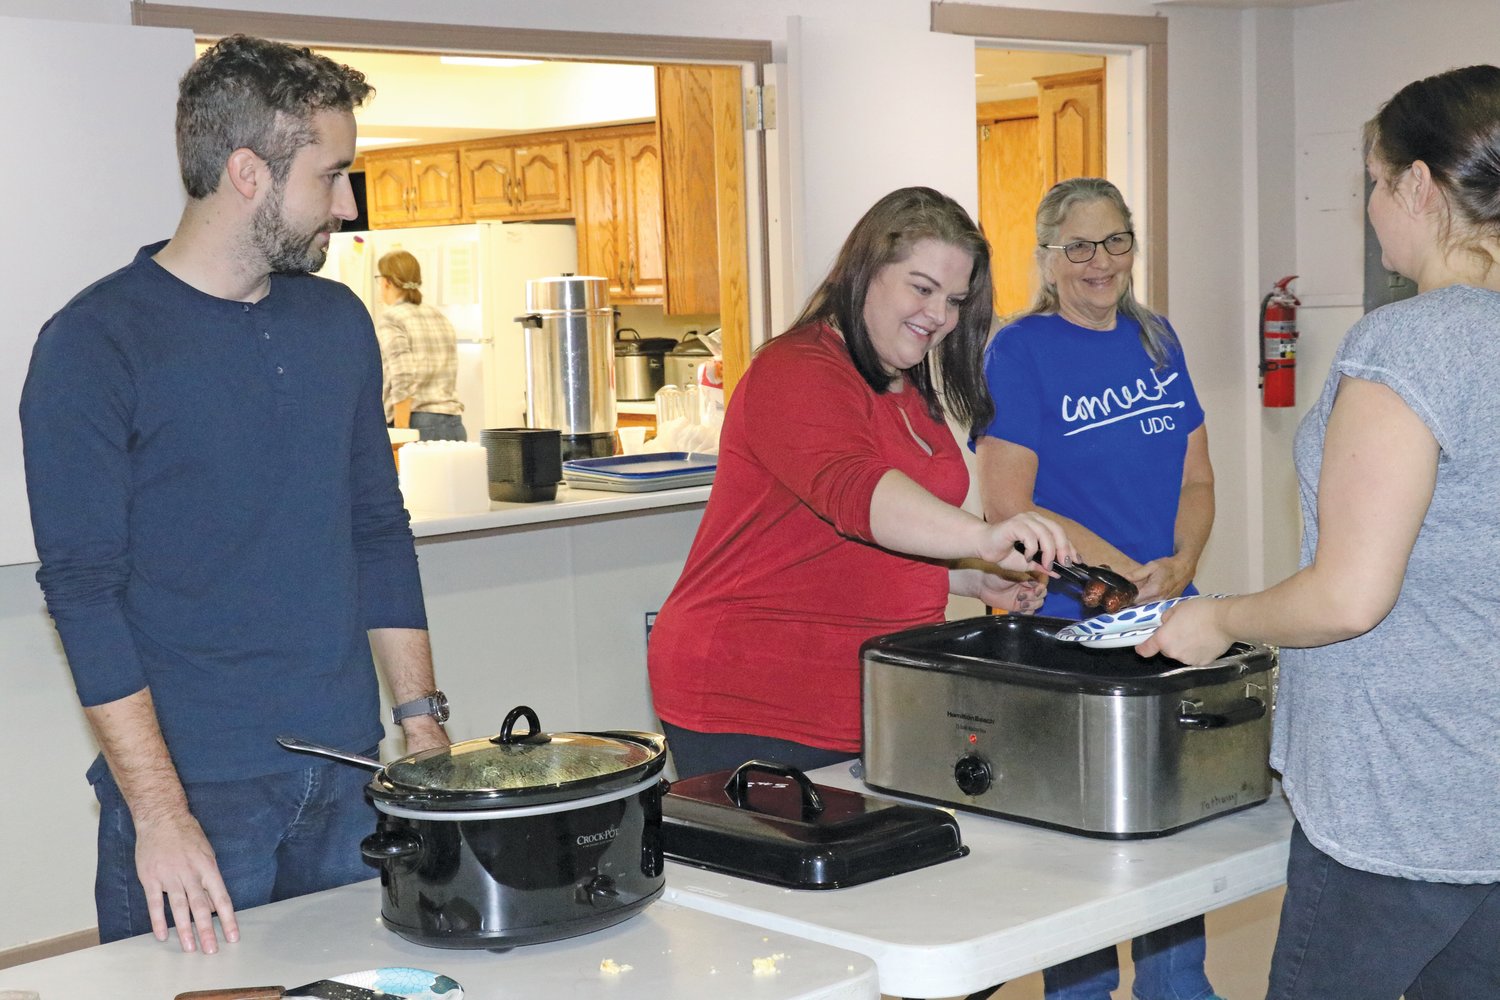 Hannah Bontrager, middle, and Randall Gingerich, left, serve up fried mush, pancakes, sausages, eggs and fruit during a fundraiser for Freedom 423 on Saturday, Dec. 4 at Pathway Christian School.